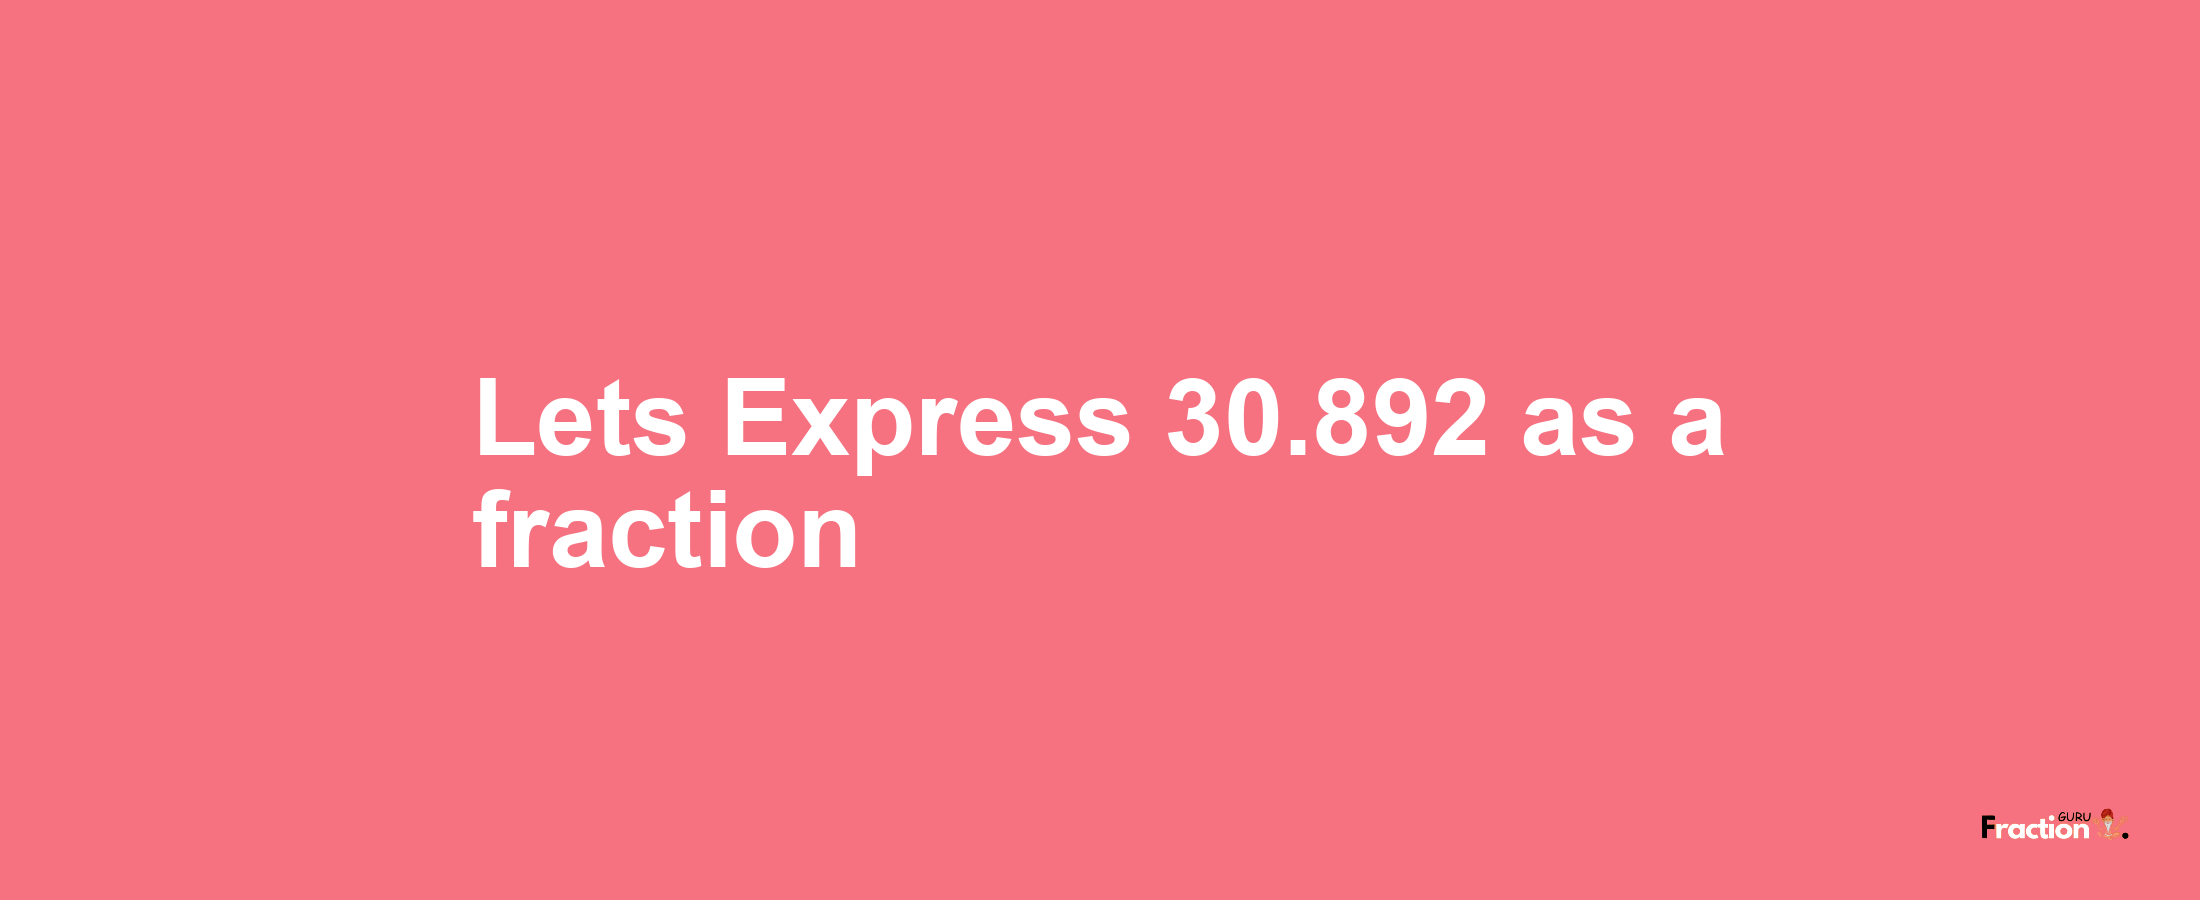 Lets Express 30.892 as afraction